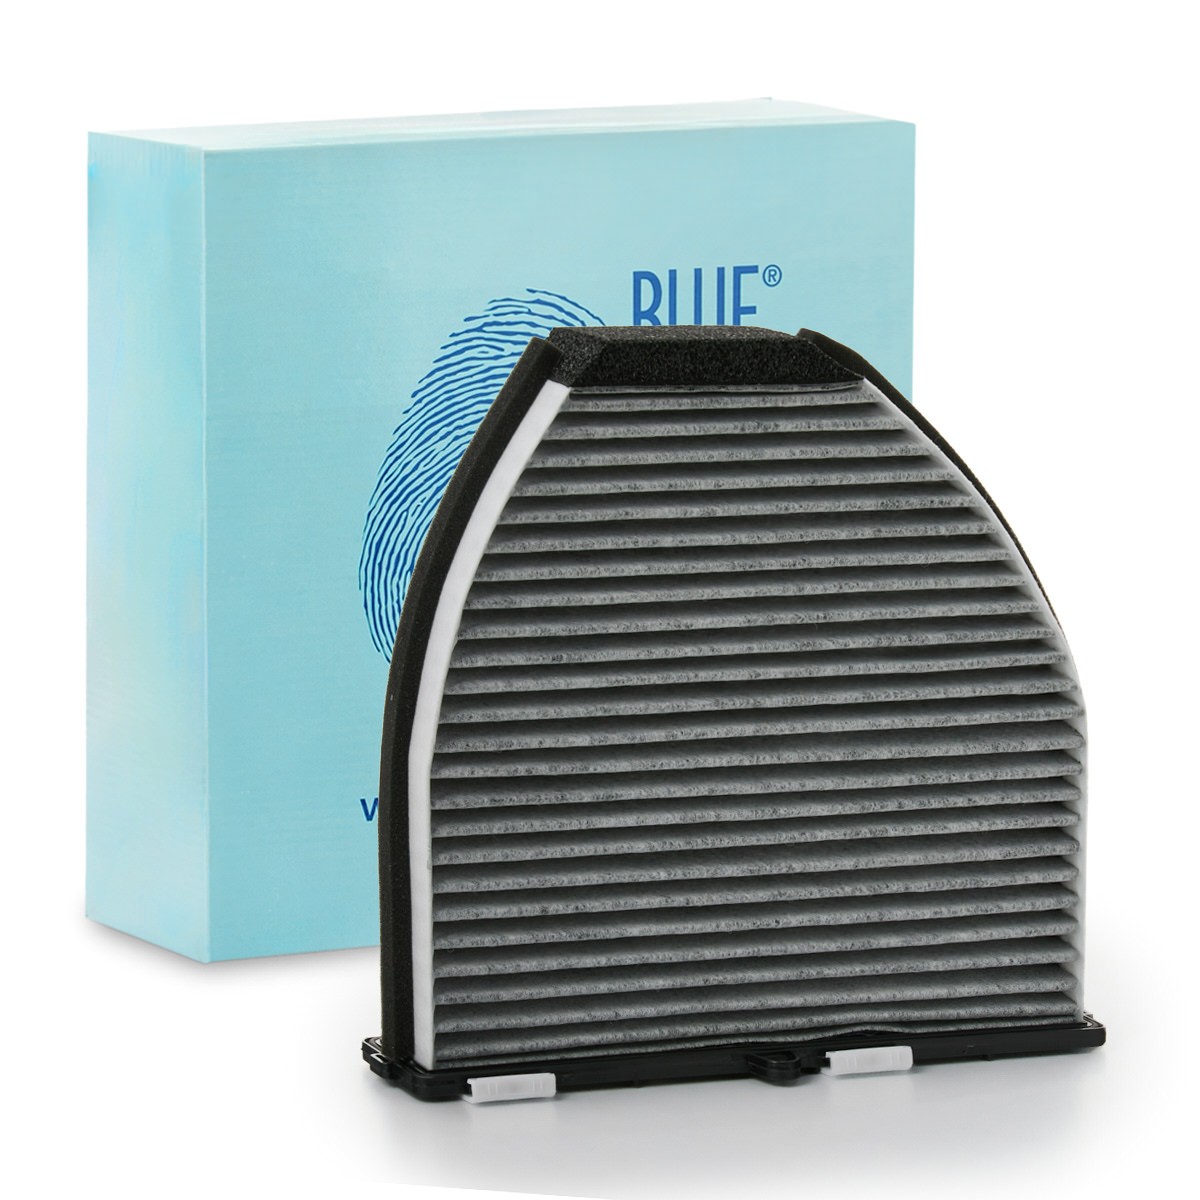 BLUE PRINT ADU172501 Air conditioner filter Activated Carbon Filter, 257 mm x 275 mm x 85 mm